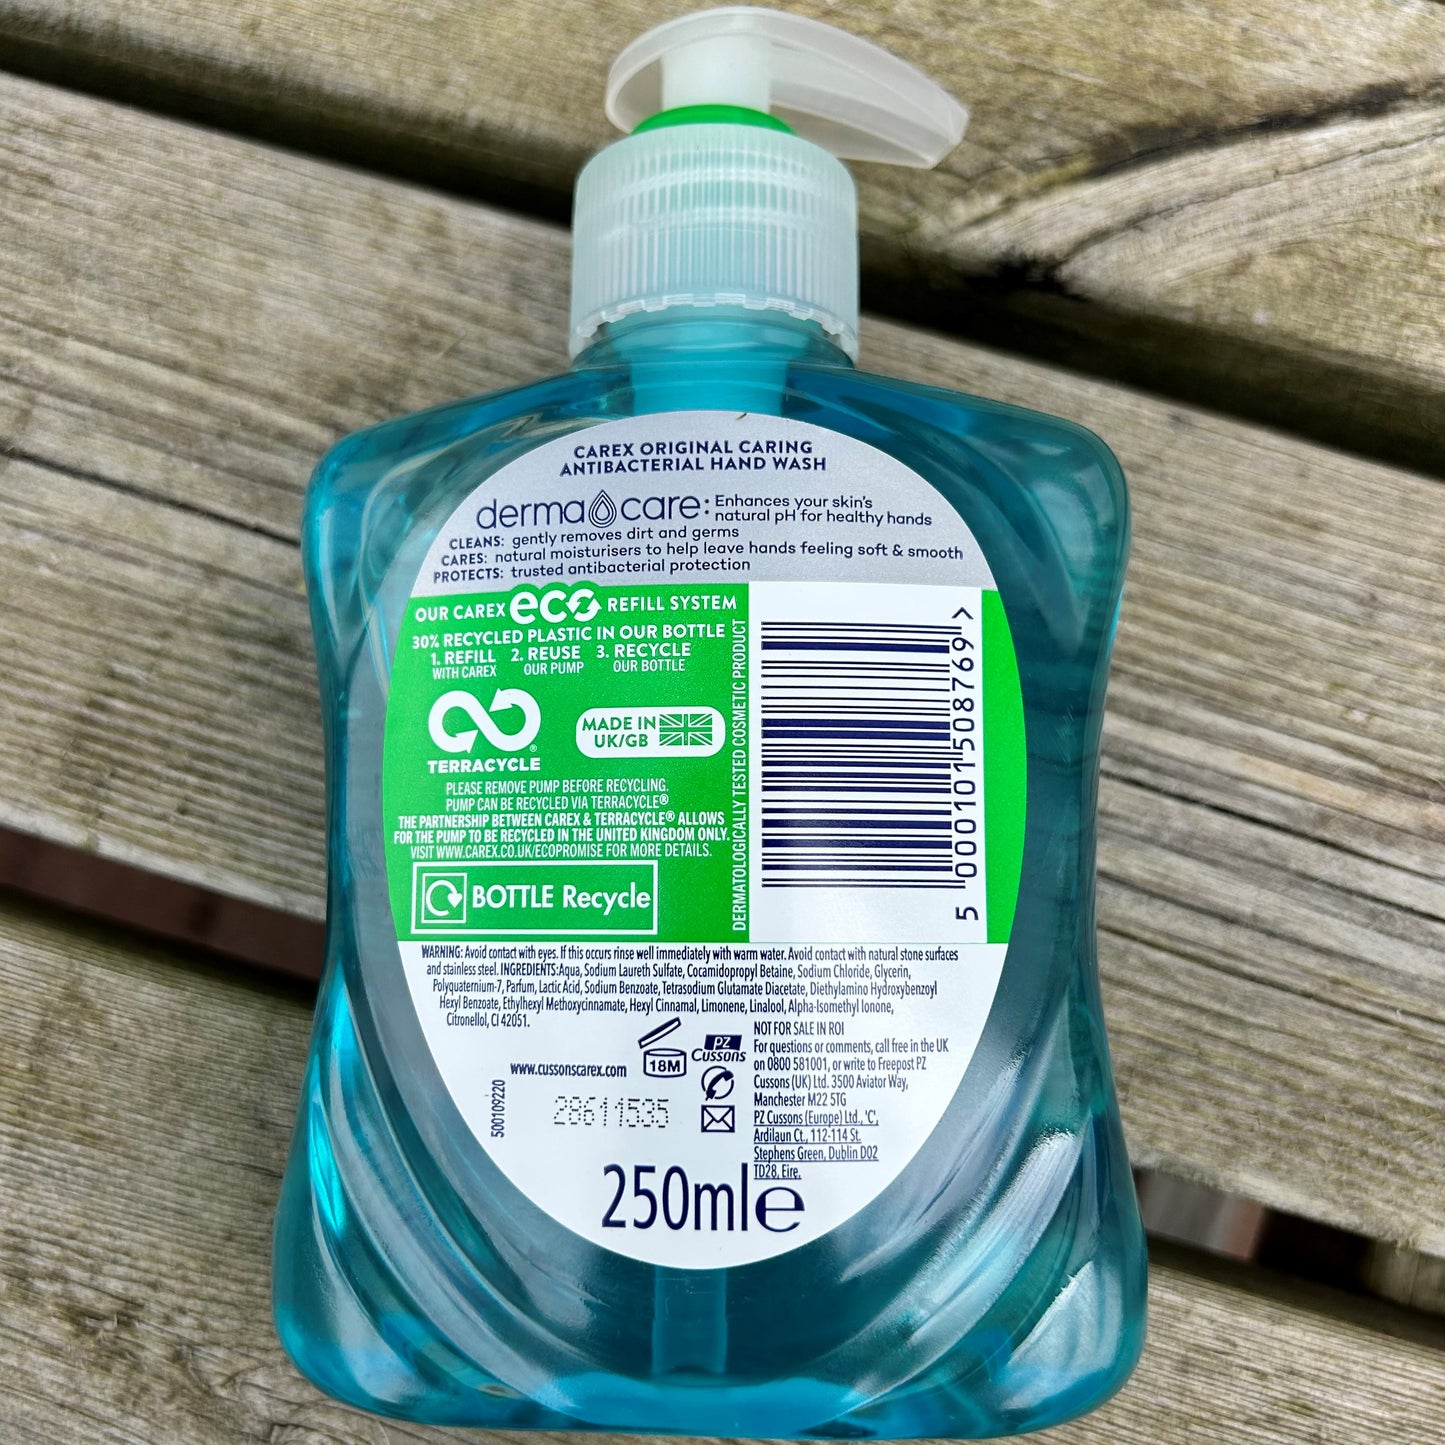 Carex liquid soap in a 250ml pump action container